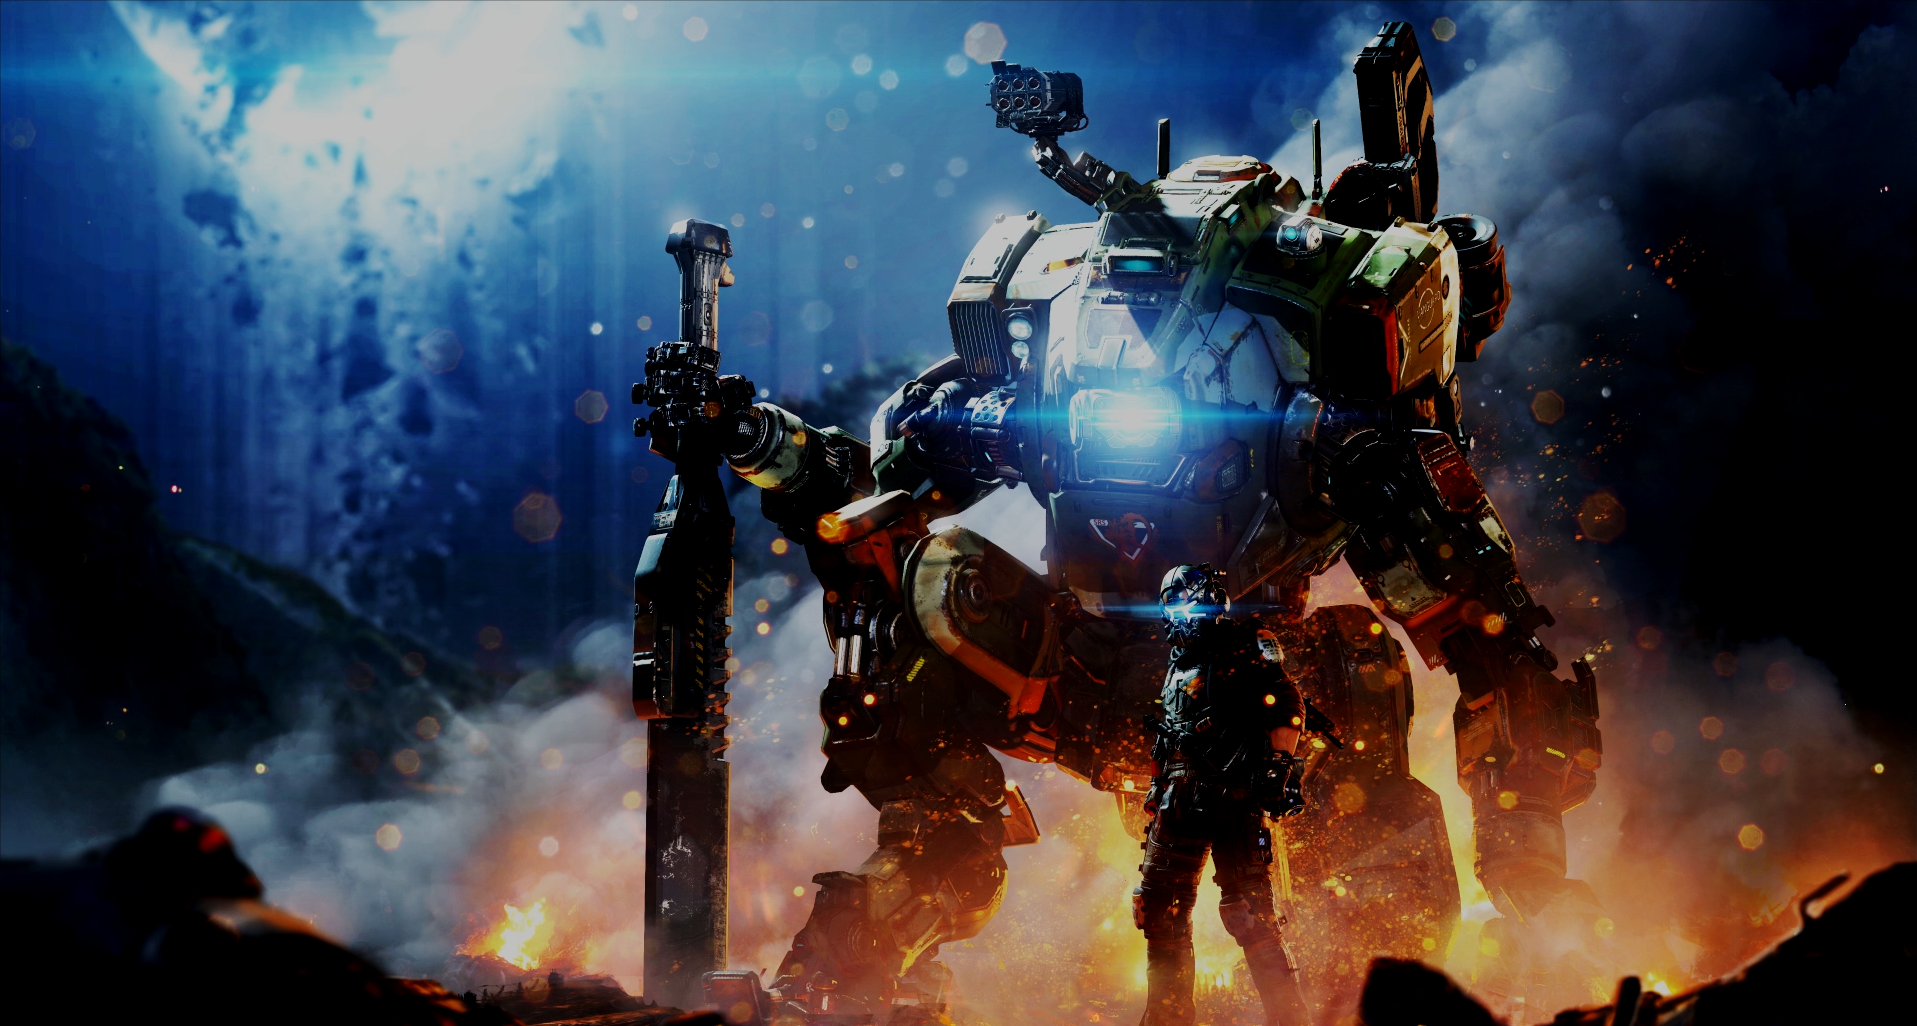 General 1917x1026 Titan fall 2 video games video game art mechs video game characters